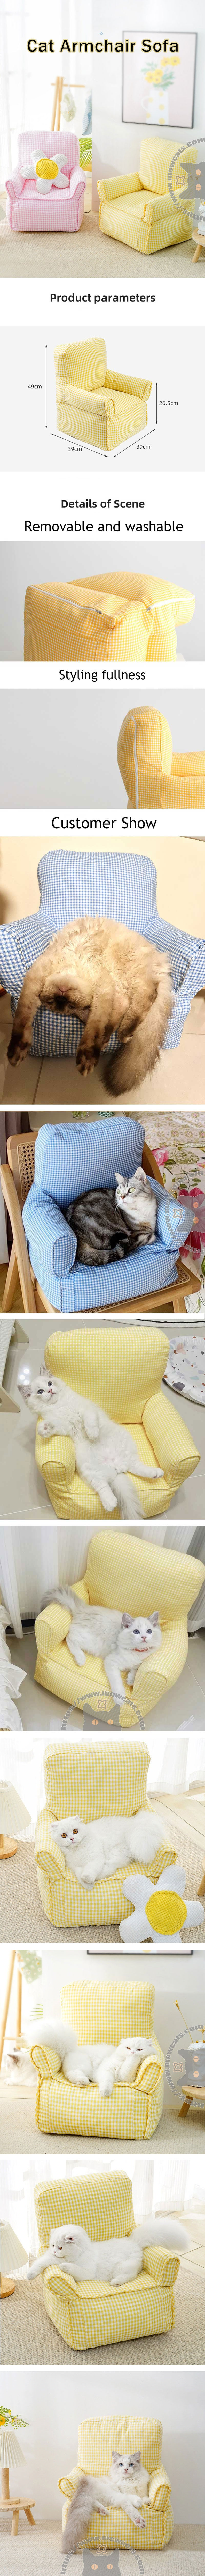 Mini Cat Armchair Sofas Fluffy 4 Color Bed Couch (1)